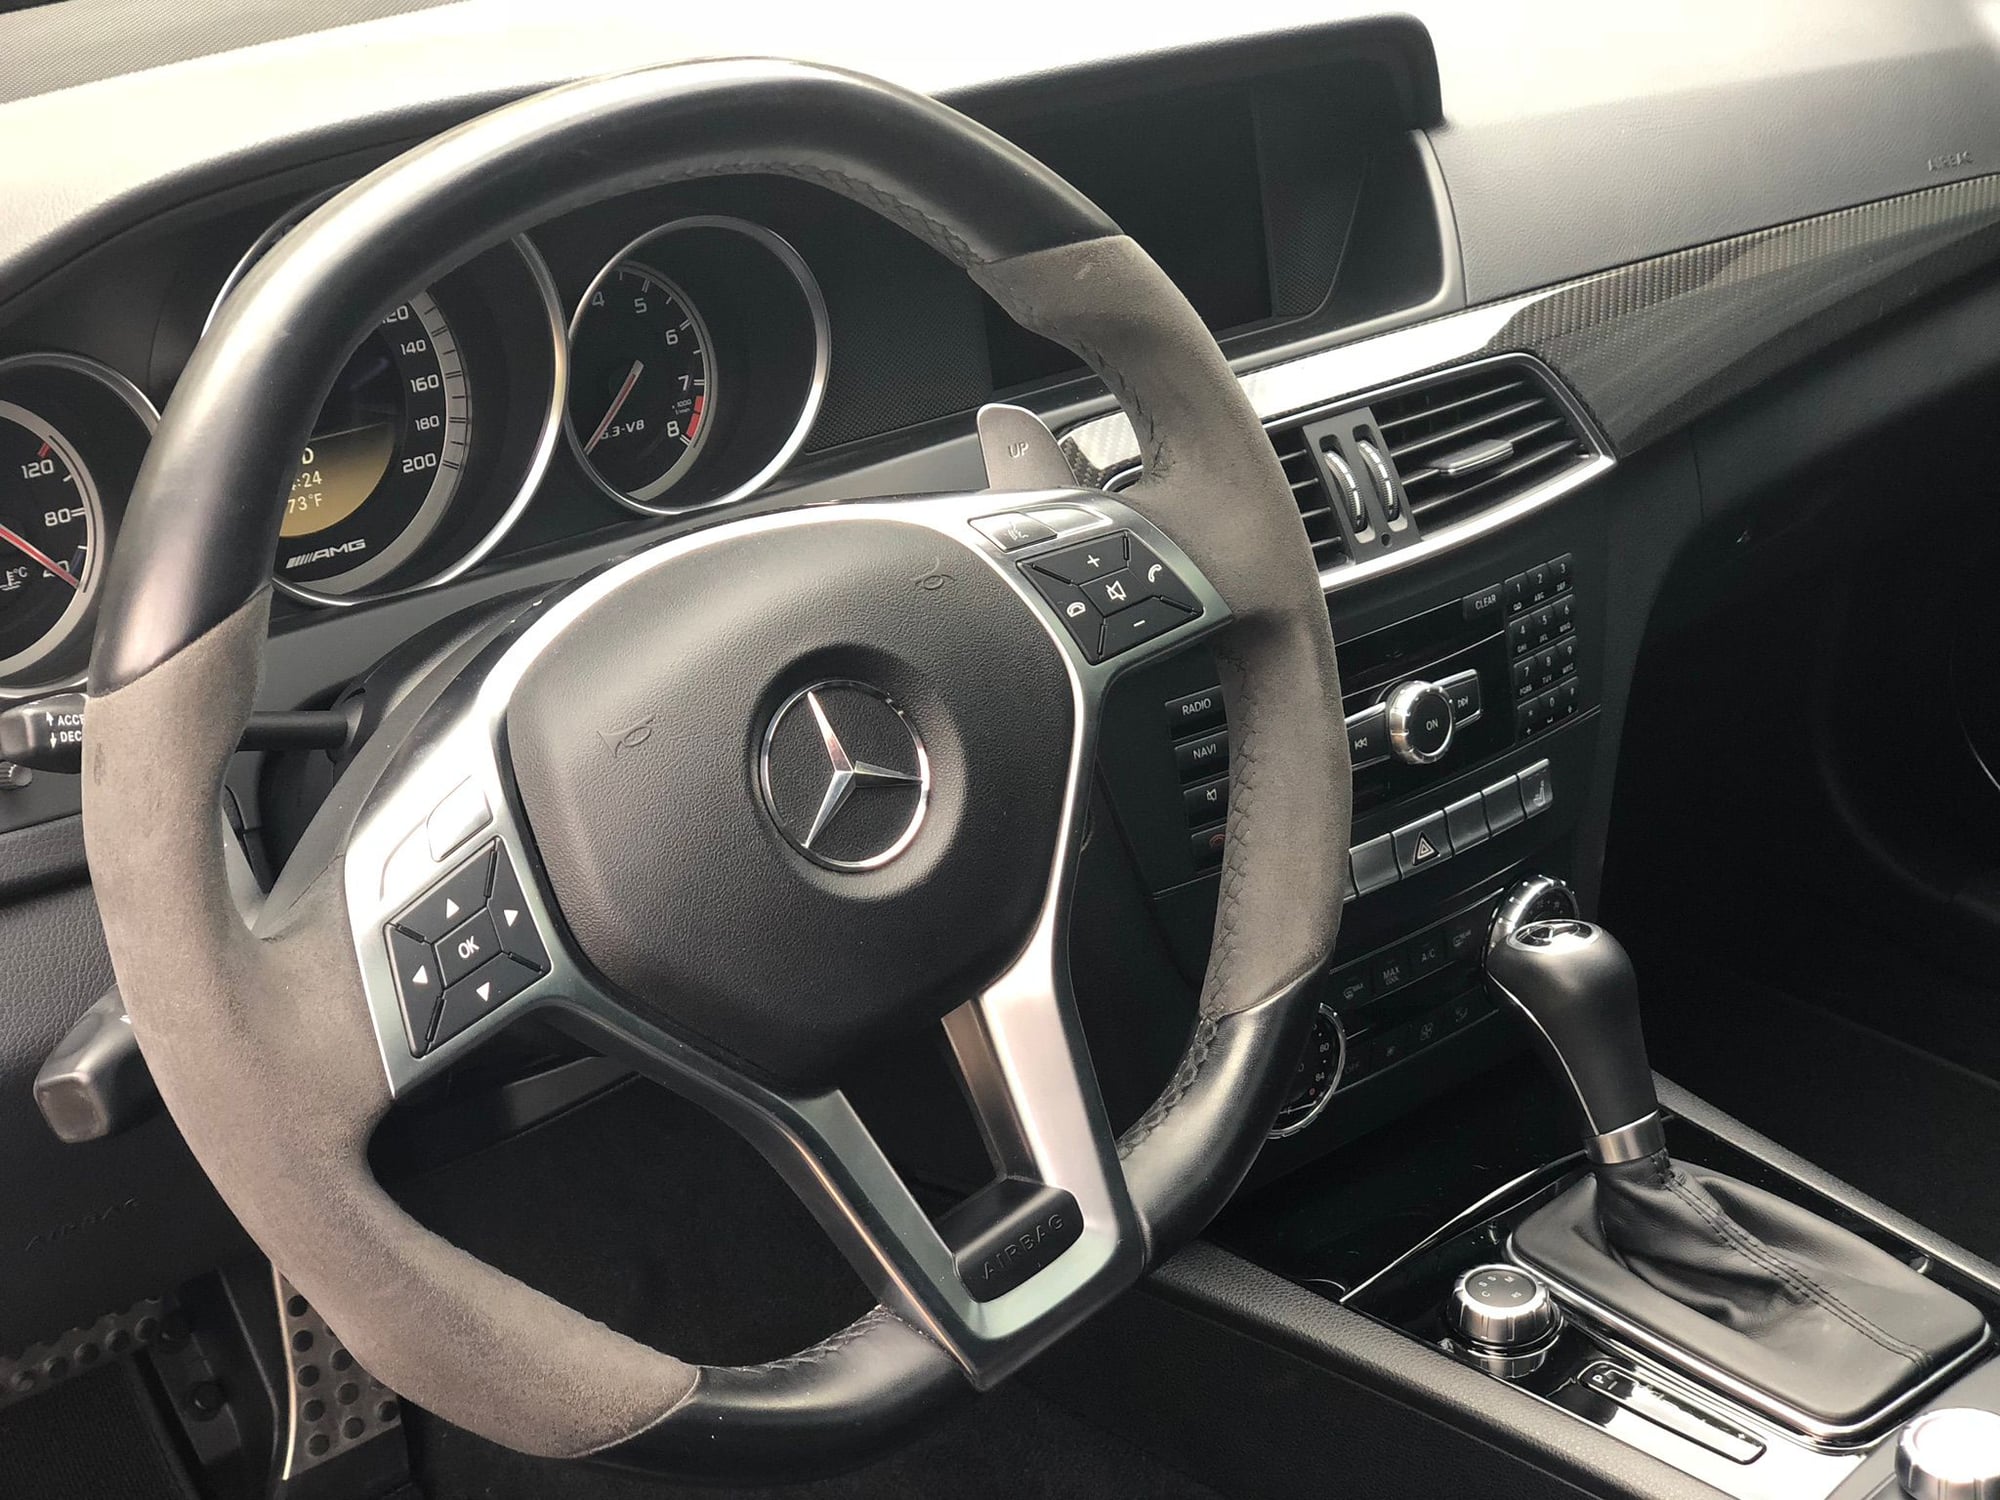 2012 Mercedes-Benz C63 AMG - 2012 Mercedes C63 AMG - Used - VIN Upon request - 40,000 Miles - 8 cyl - 2WD - Automatic - Sedan - Gray - Port Jeff, NY 11777, United States